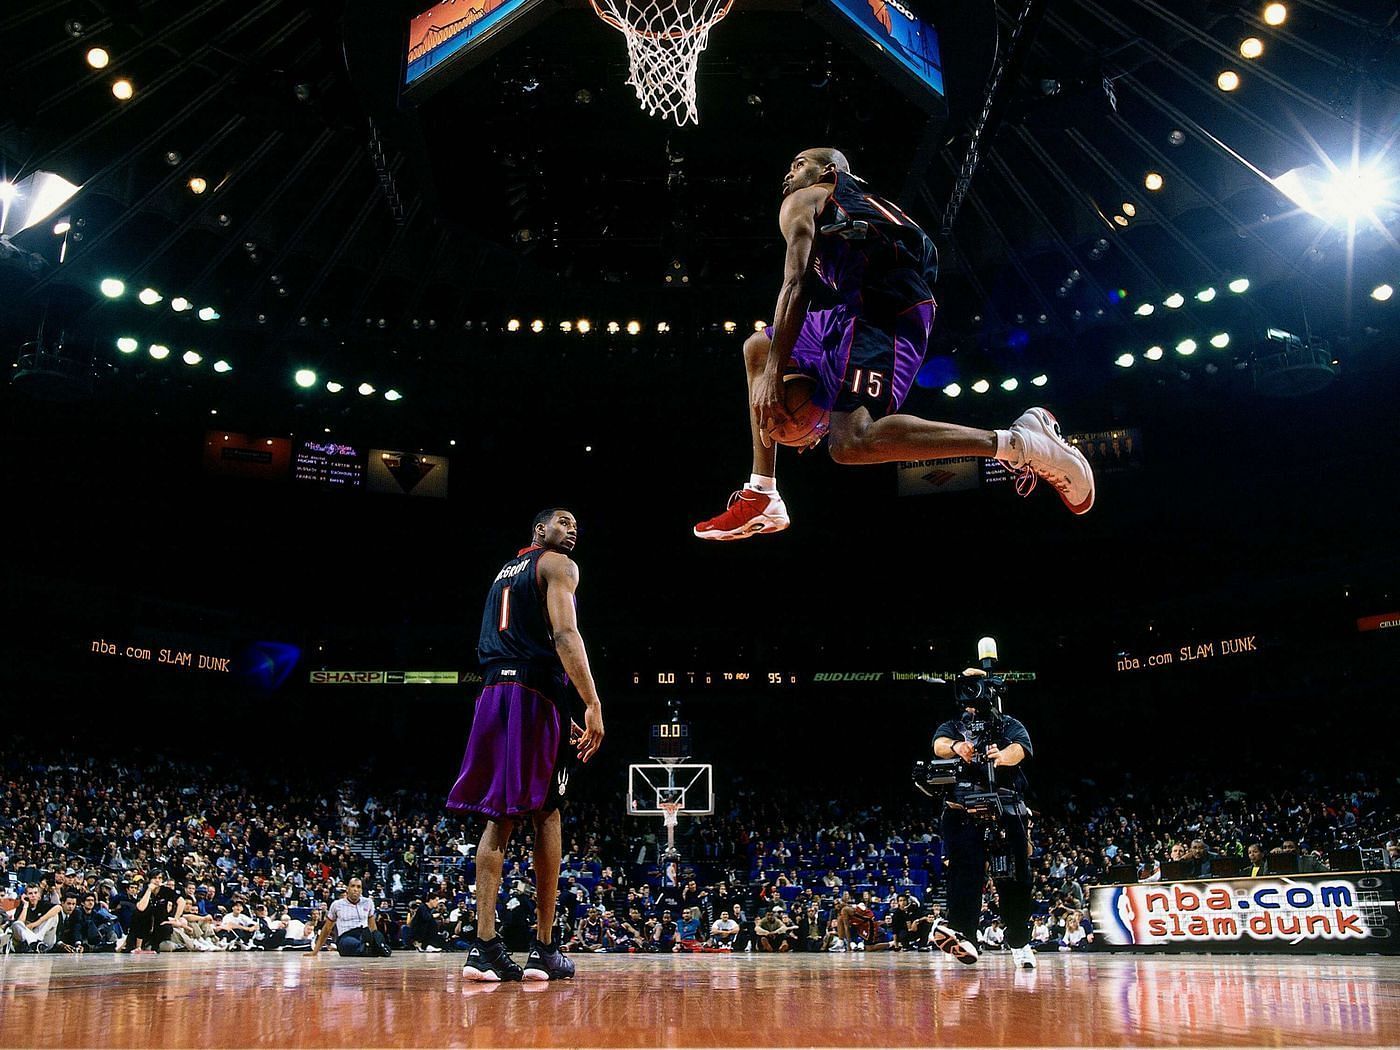 Vince Carter wearing the Tai Chis during the 2000 Slam Dunk contest